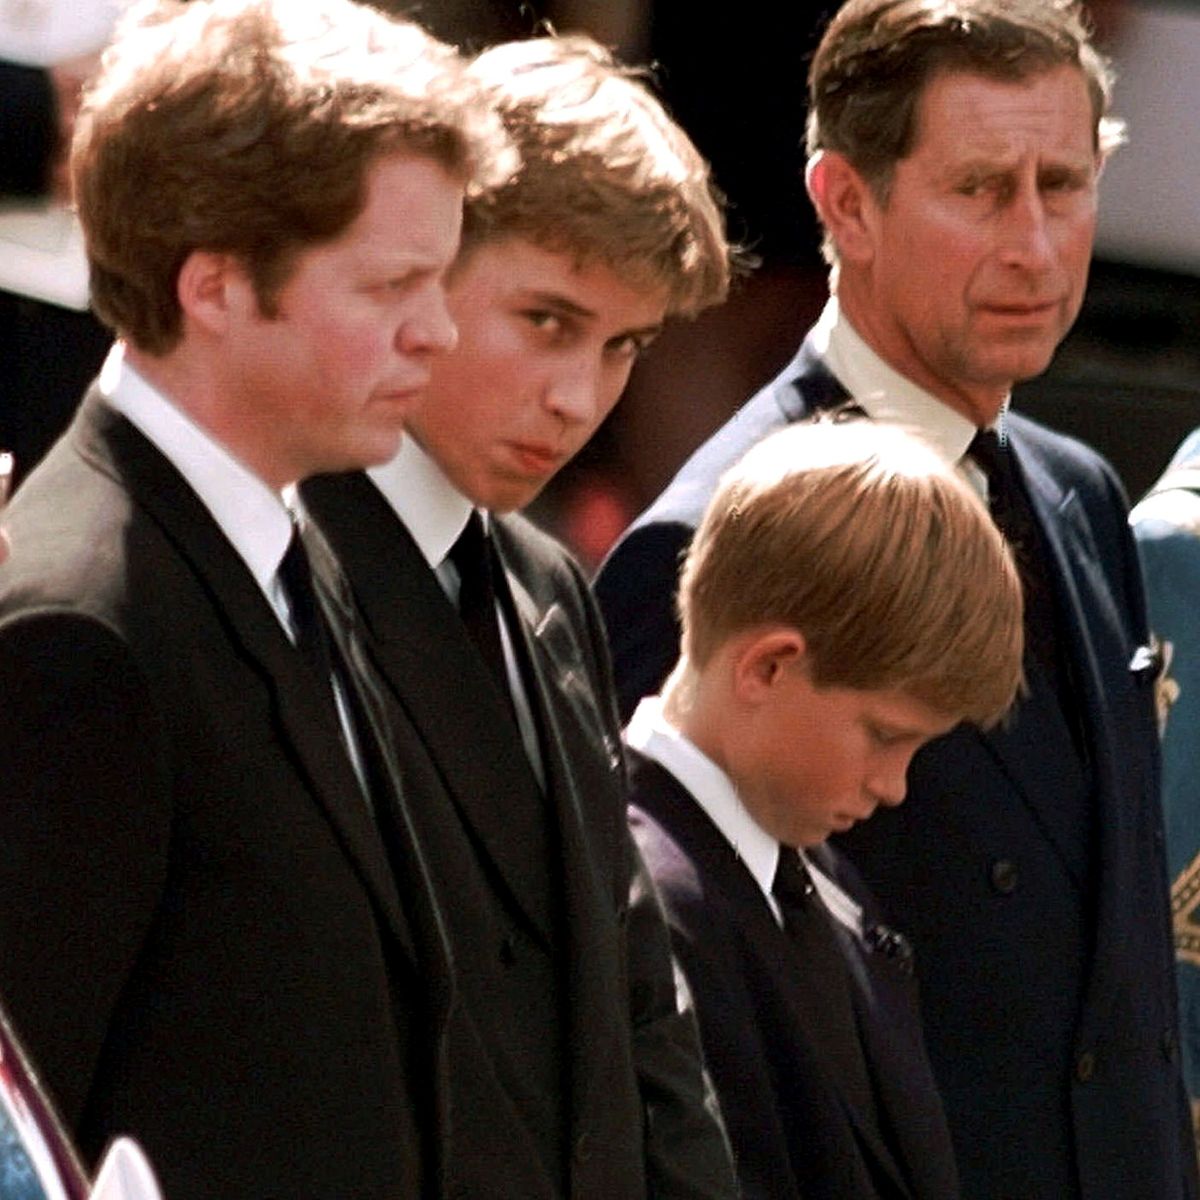 1file-photo-r-l-prince-charles-prince-harry-prince-william-and-earl-spencer-watch-as-the-coffin-1673424550796882273052-1673440627720-1673440627824488024683.jpg